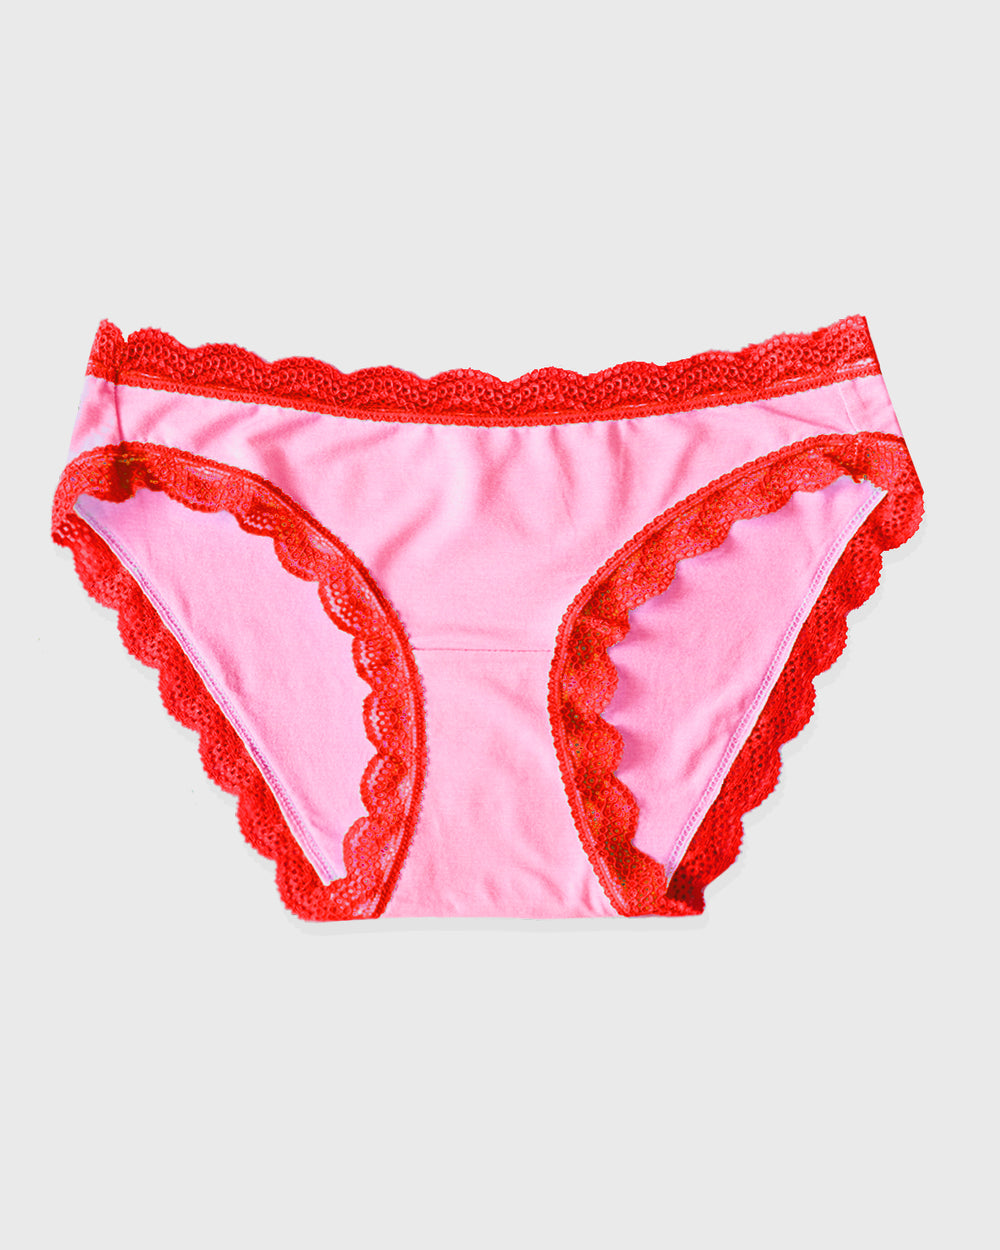 The Original Knicker - Pink and Red Contrast Stripe & Stare